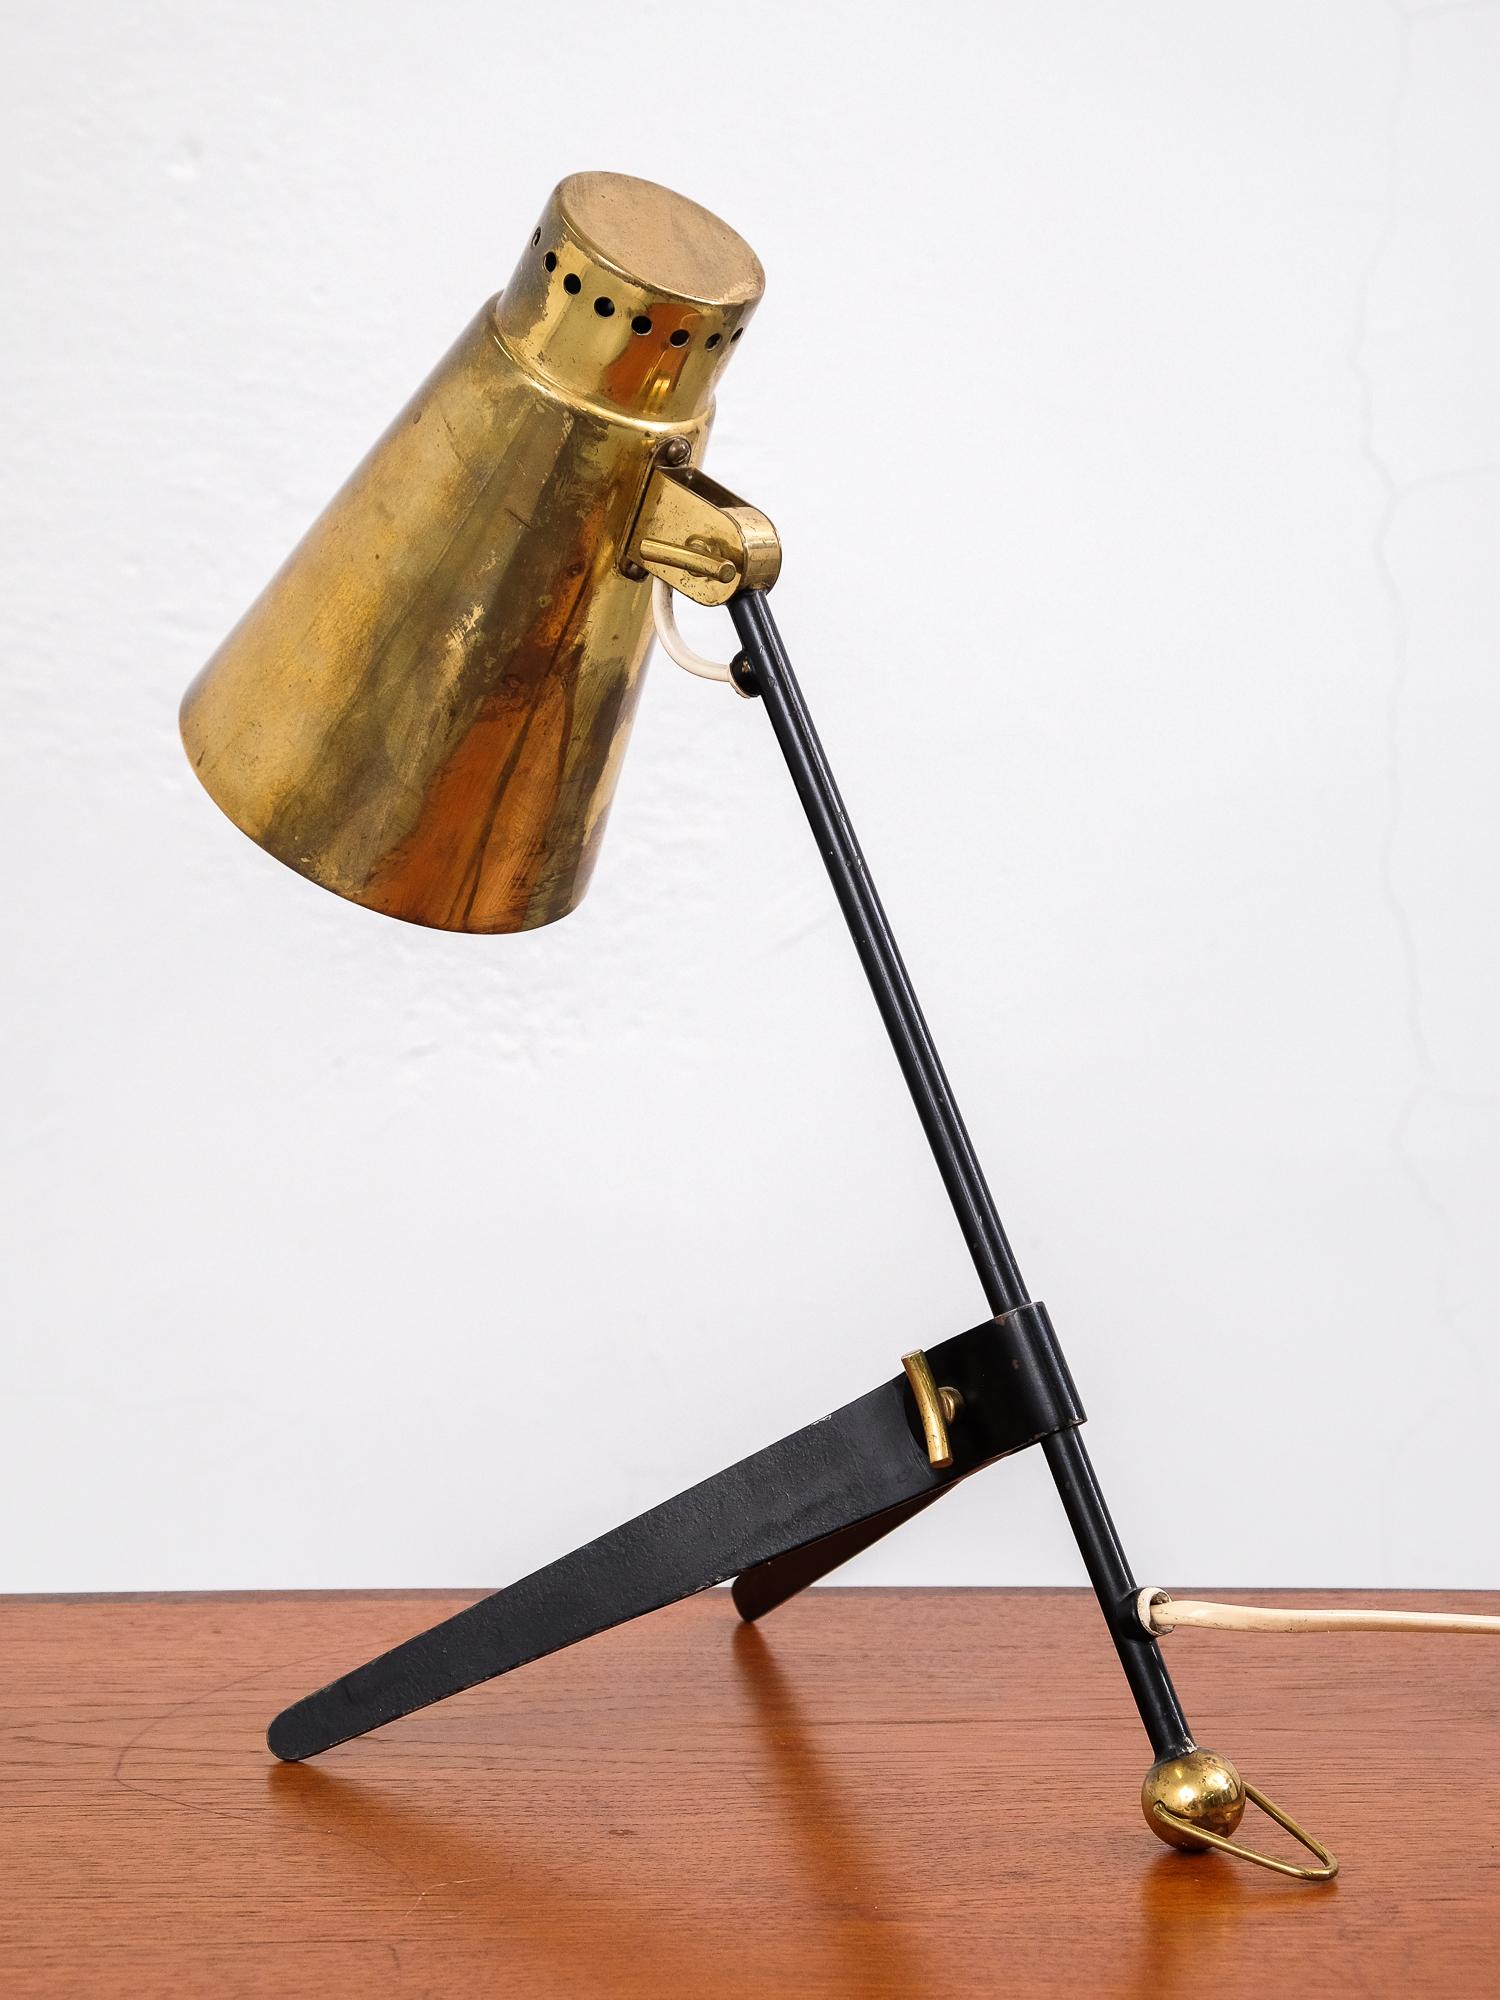 Scandinavian Modern Brass and Metal Table or Wall Lamp Model 'Ev70' by Itsu, Finland, 1950s